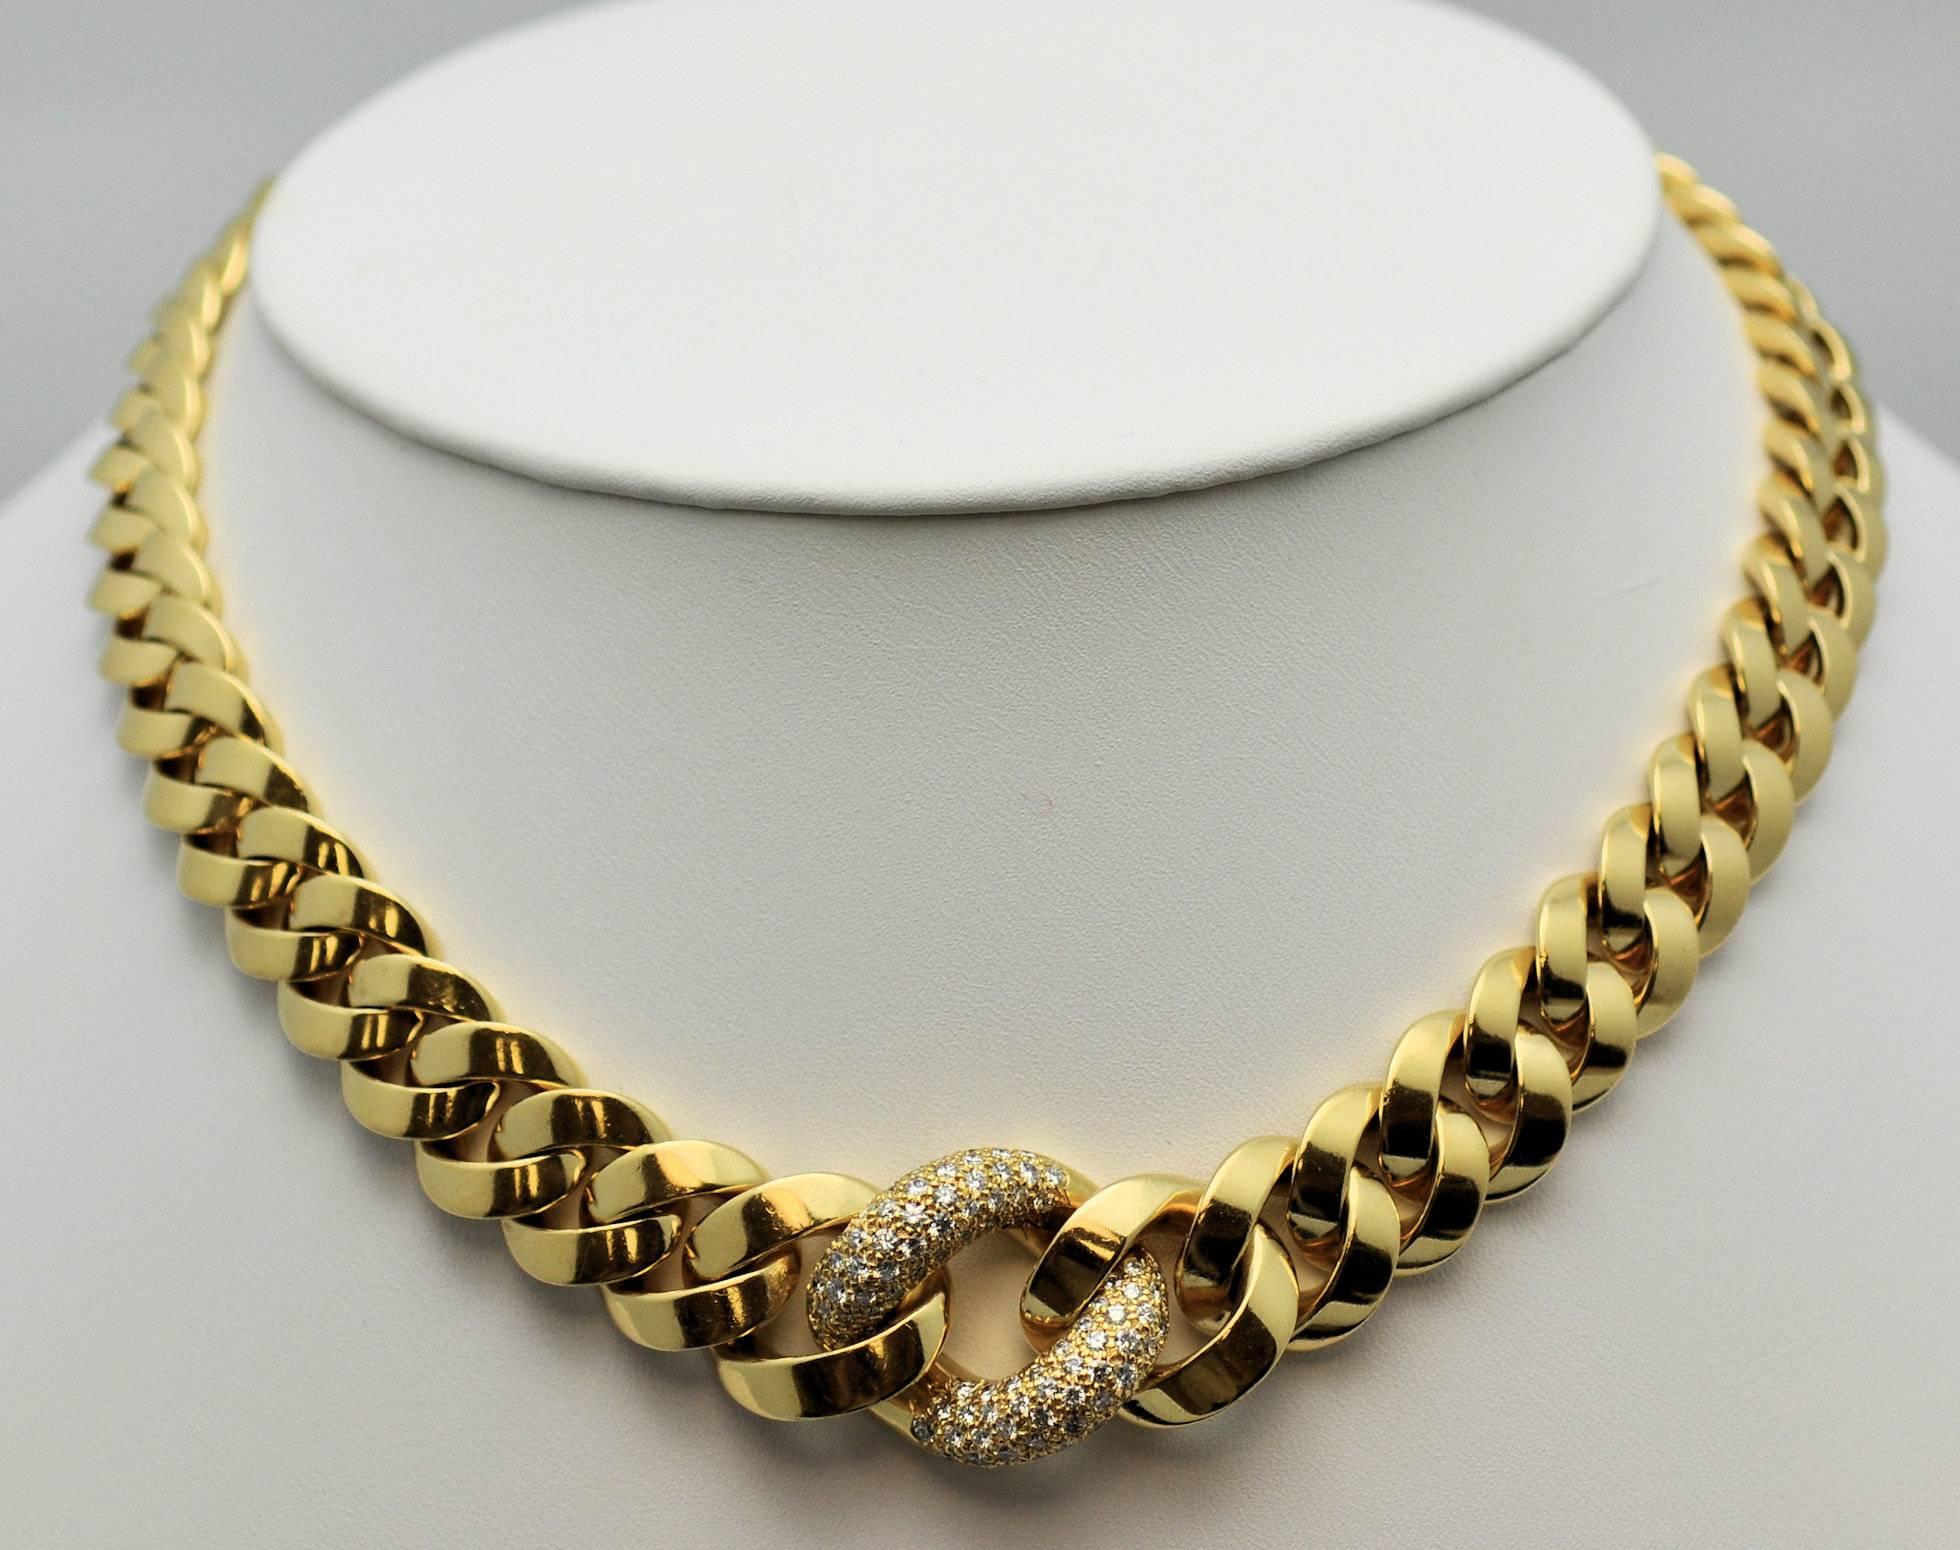 18Karat yellow gold solid curb link choker necklace with center link pave' set with diamonds.  Contains 94 round diamonds for a total weight of approximately 2.00 carats of grade VVS, G.  Weighs 120.7 dwt. or 190.37 gr.
.8 in. wide at center
.3